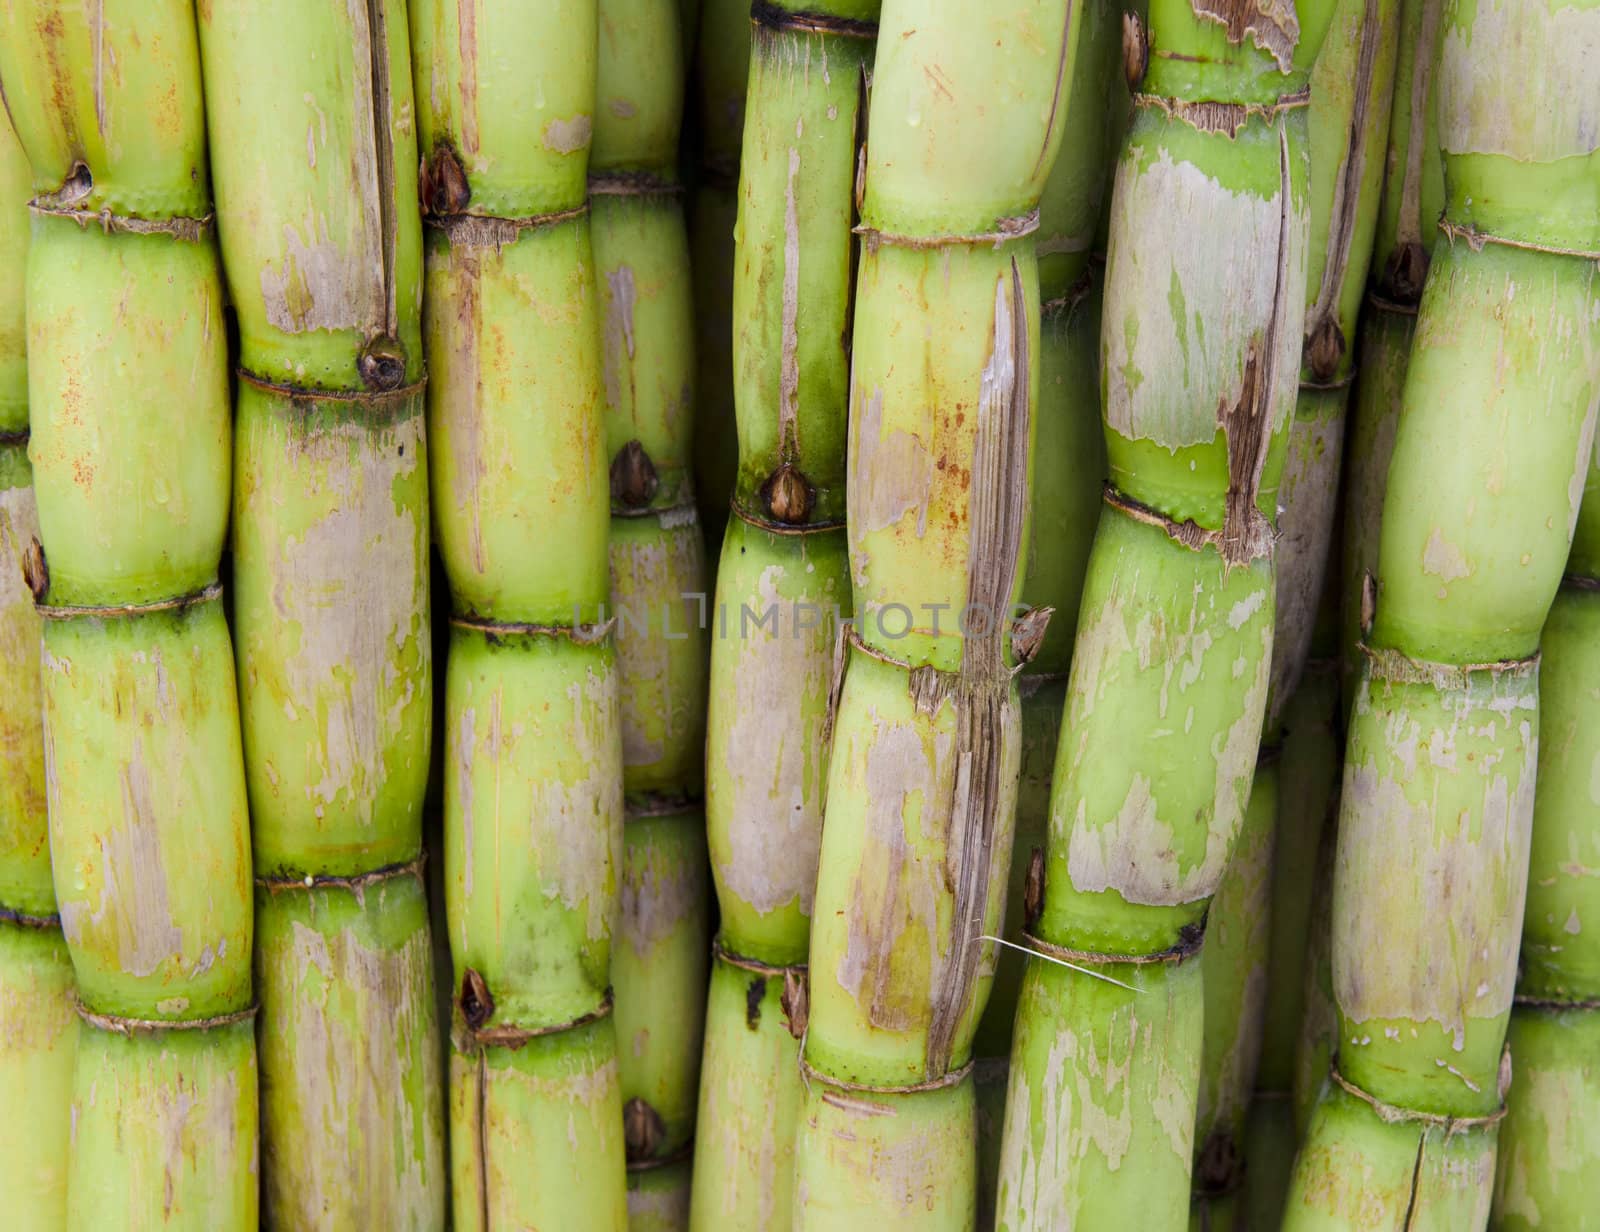 a lot of sugar cane for sale in the market
